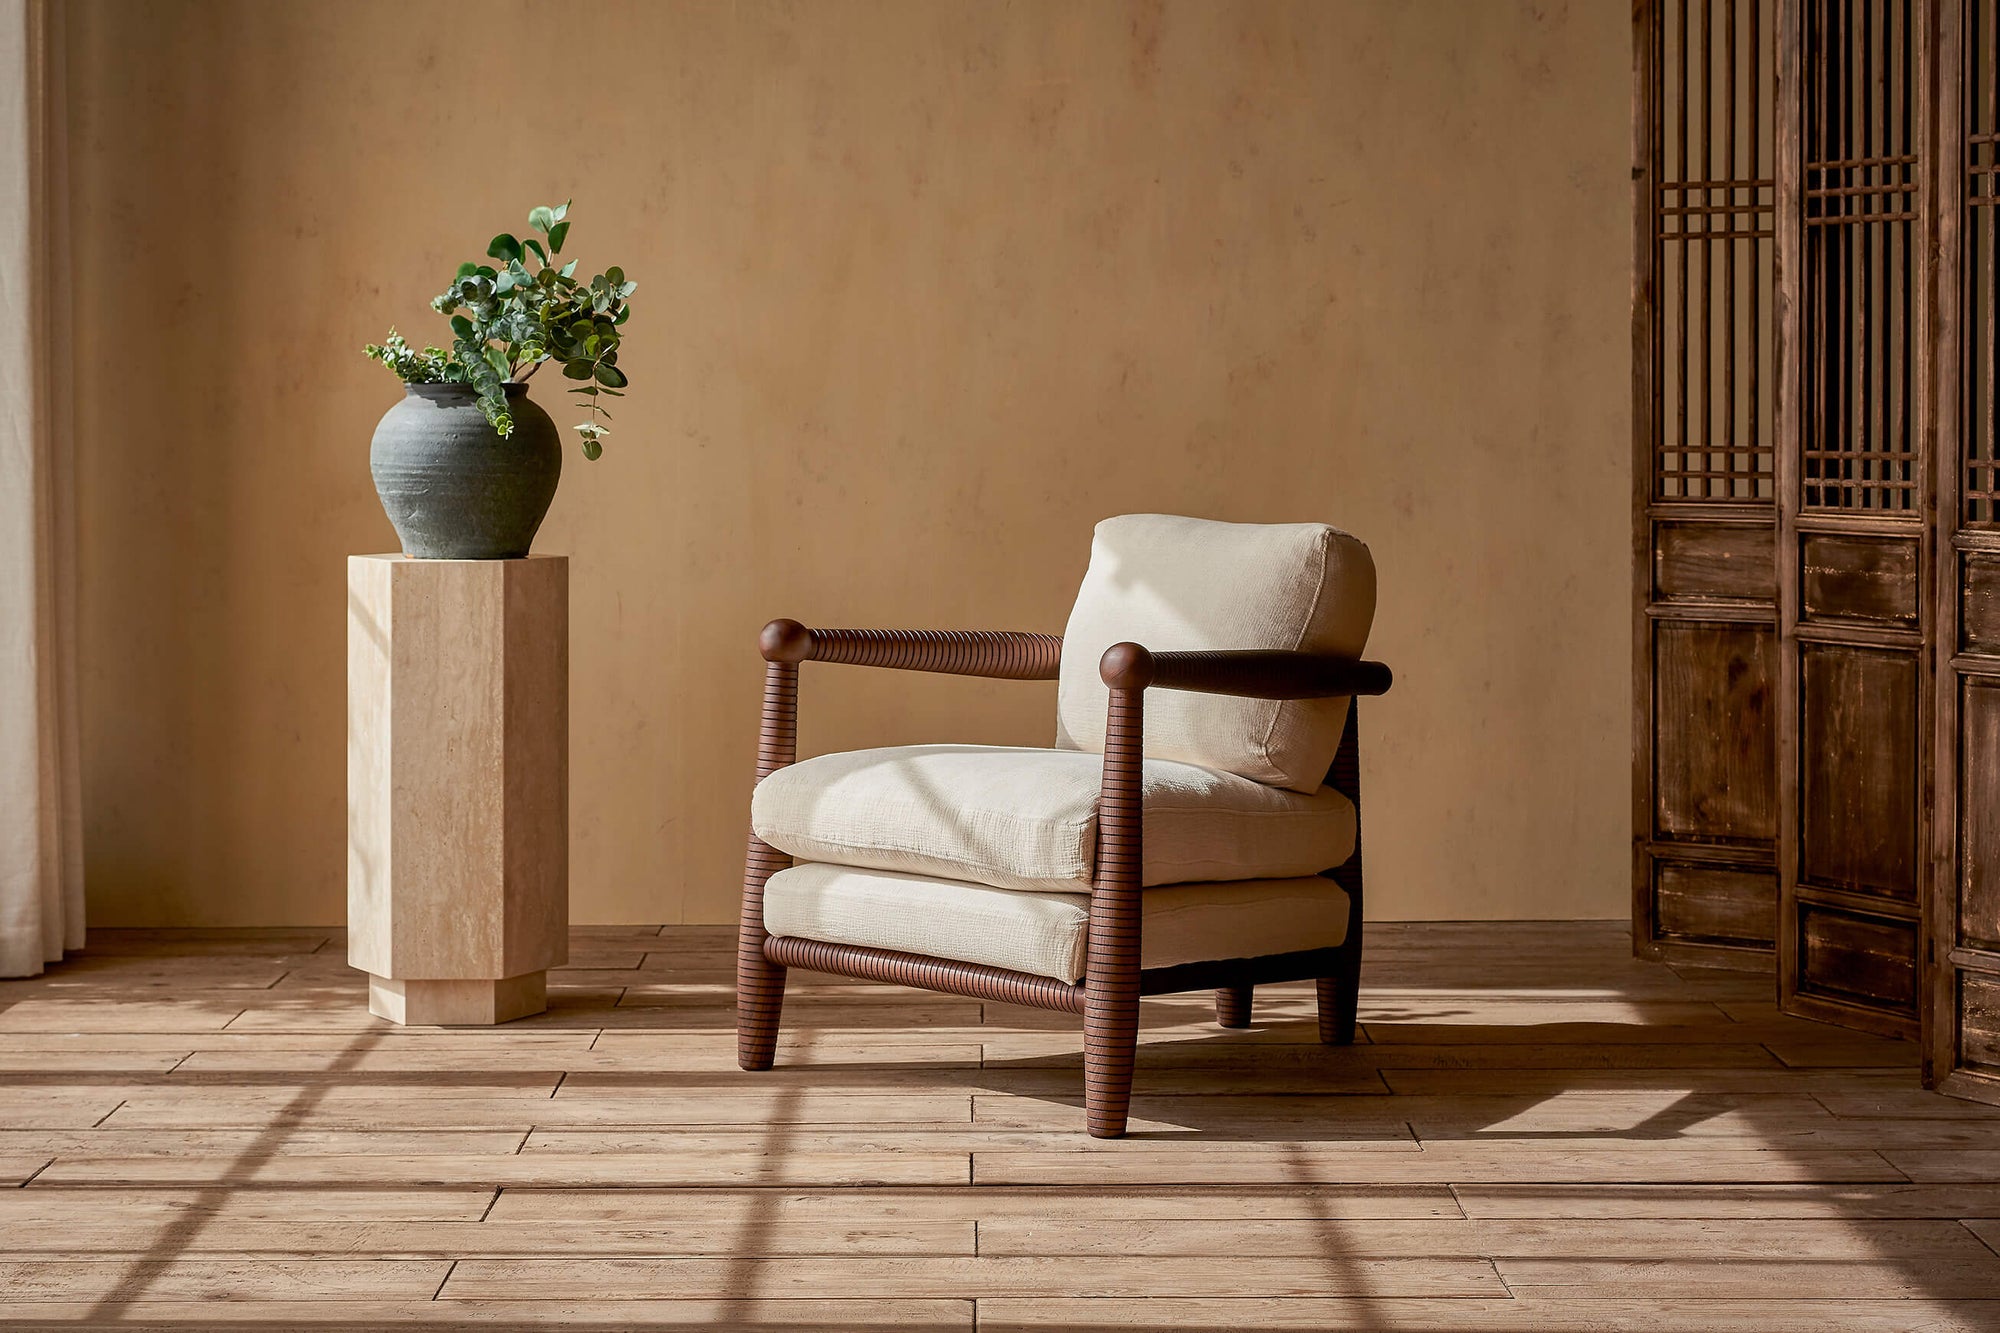 Gio Chair in a Dusky Ash wood frame with Washed Cotton Linen cushions in Corn Silk, placed in a sunlit room next to a potted plant on top of a decorative pillar.